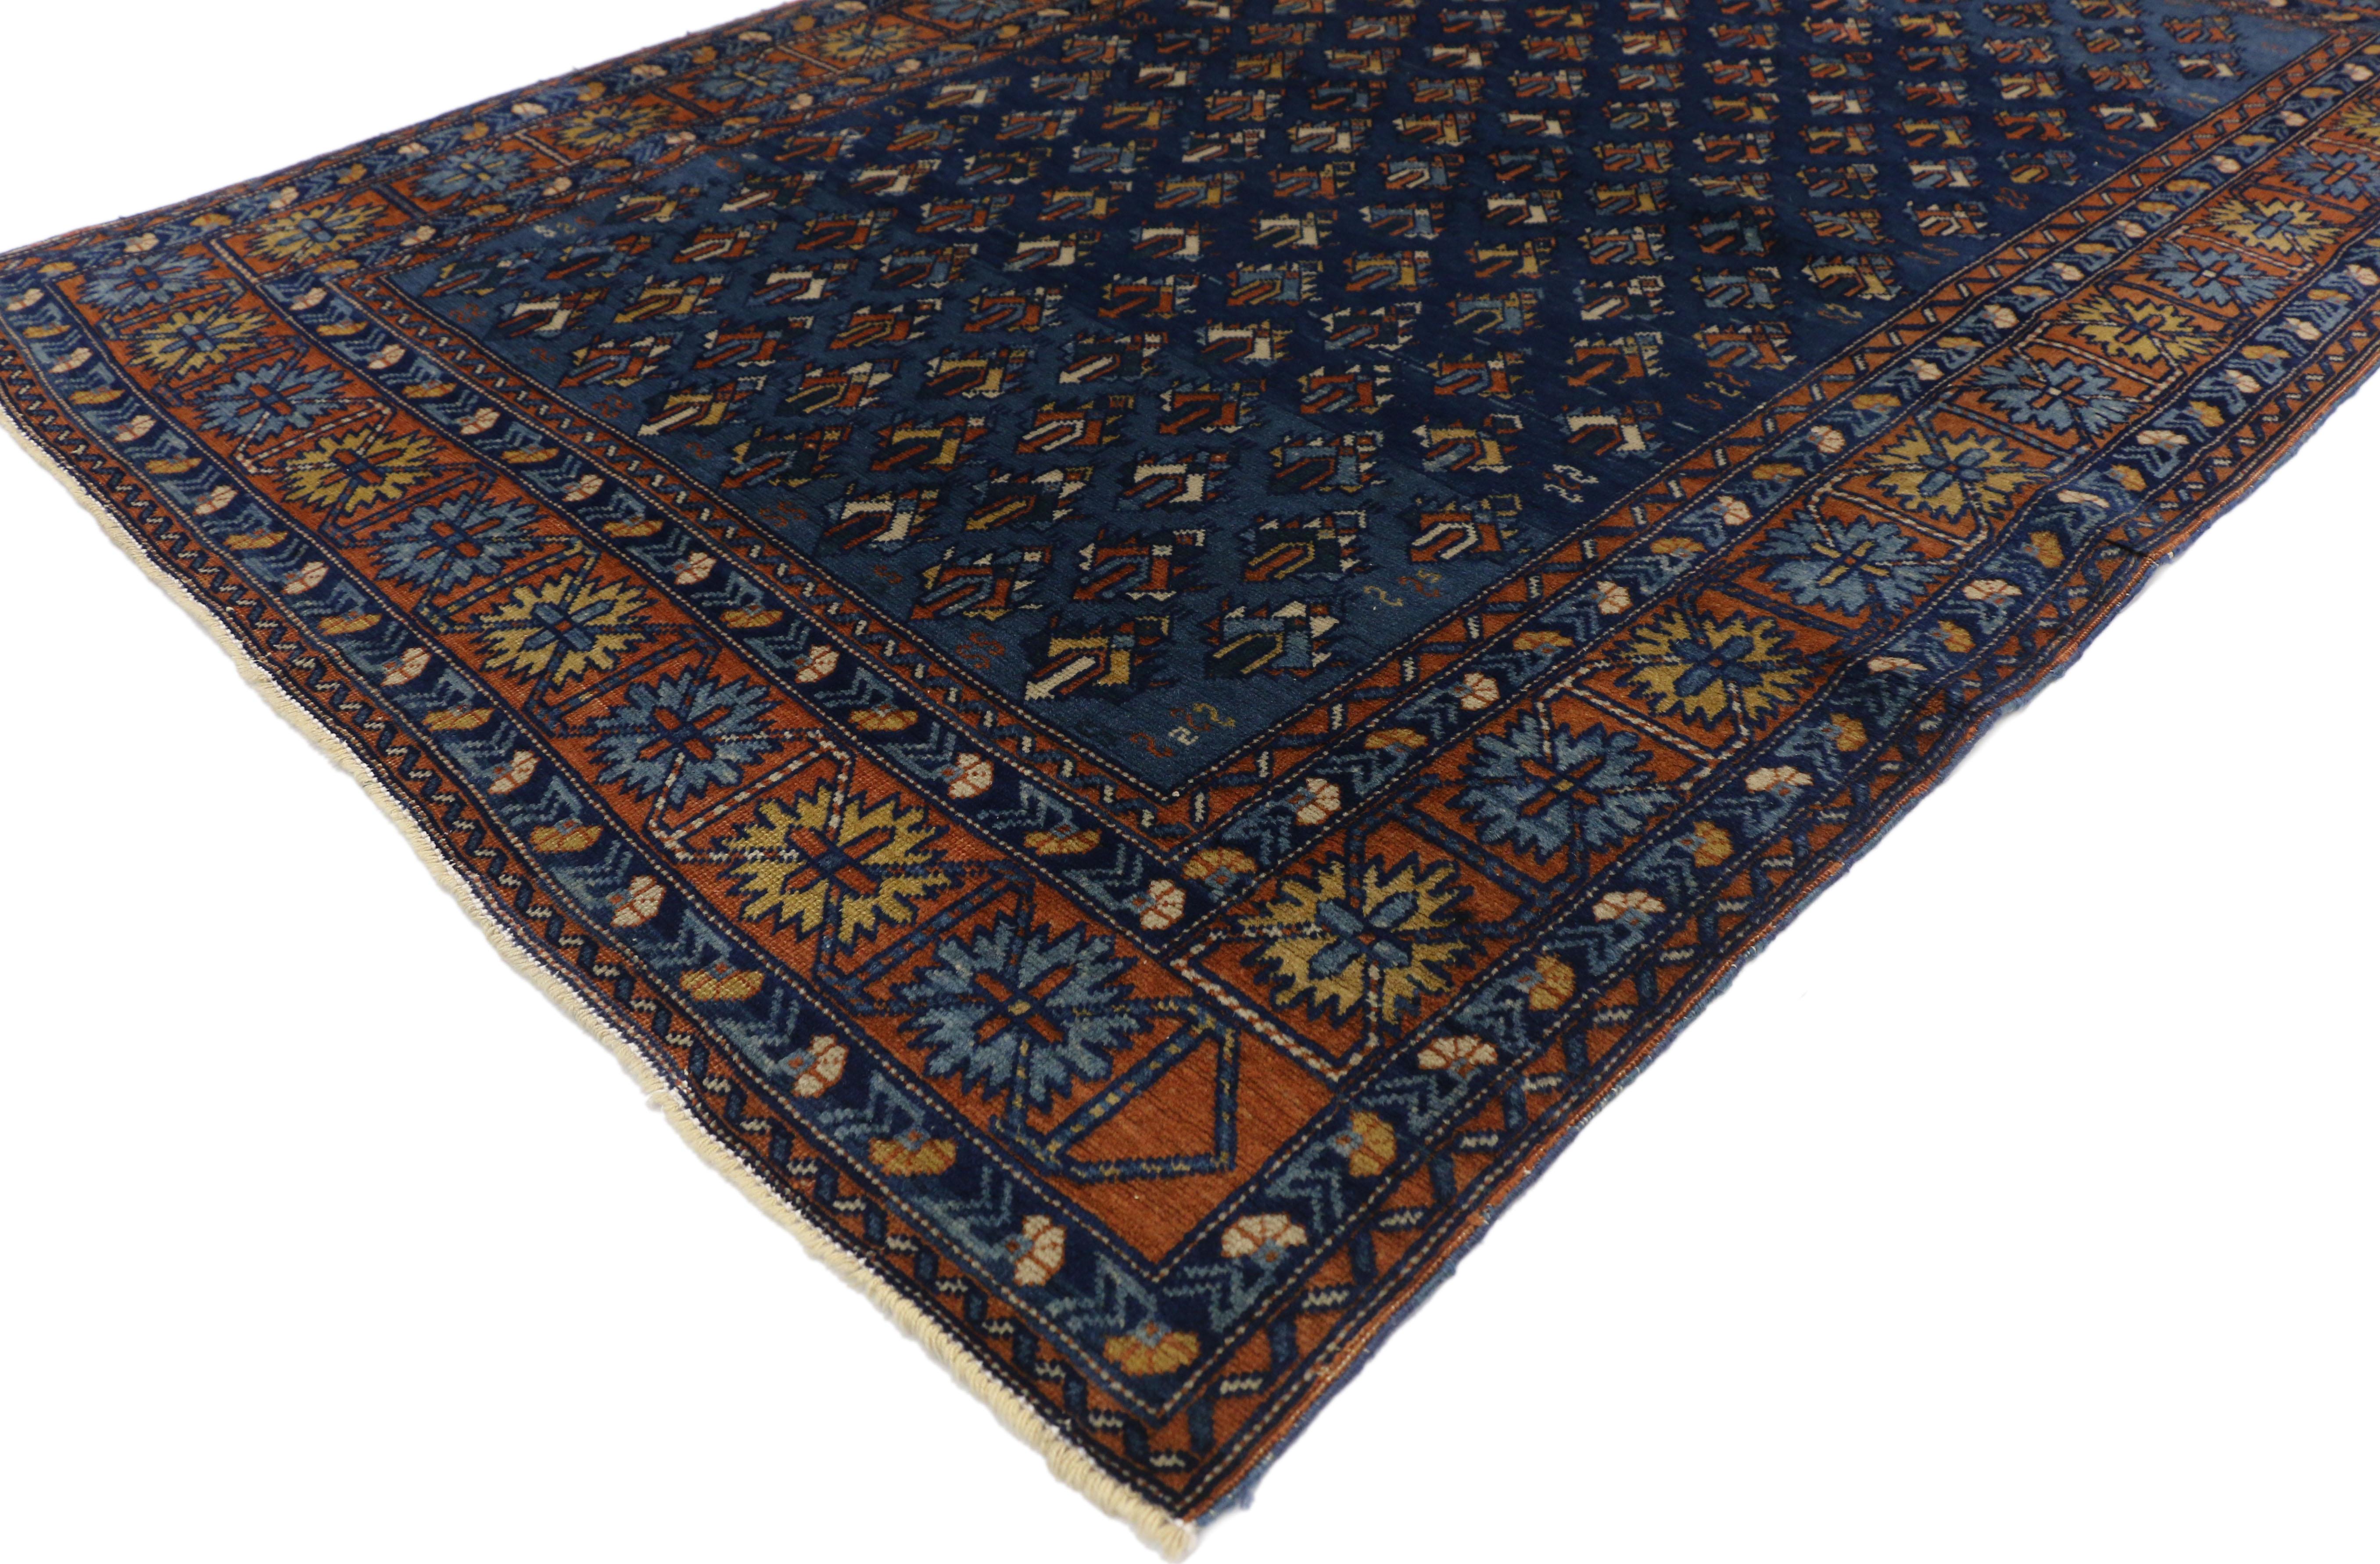 72759 Antique Yerevan Accent Rug with Modern Tribal Style, Antique Russian Armenian Rug 04'00 x 05'11. This hand-knotted wool antique Yerevan rug with modern tribal style displays a repeating geometric pattern of boteh variation in an abashed field.